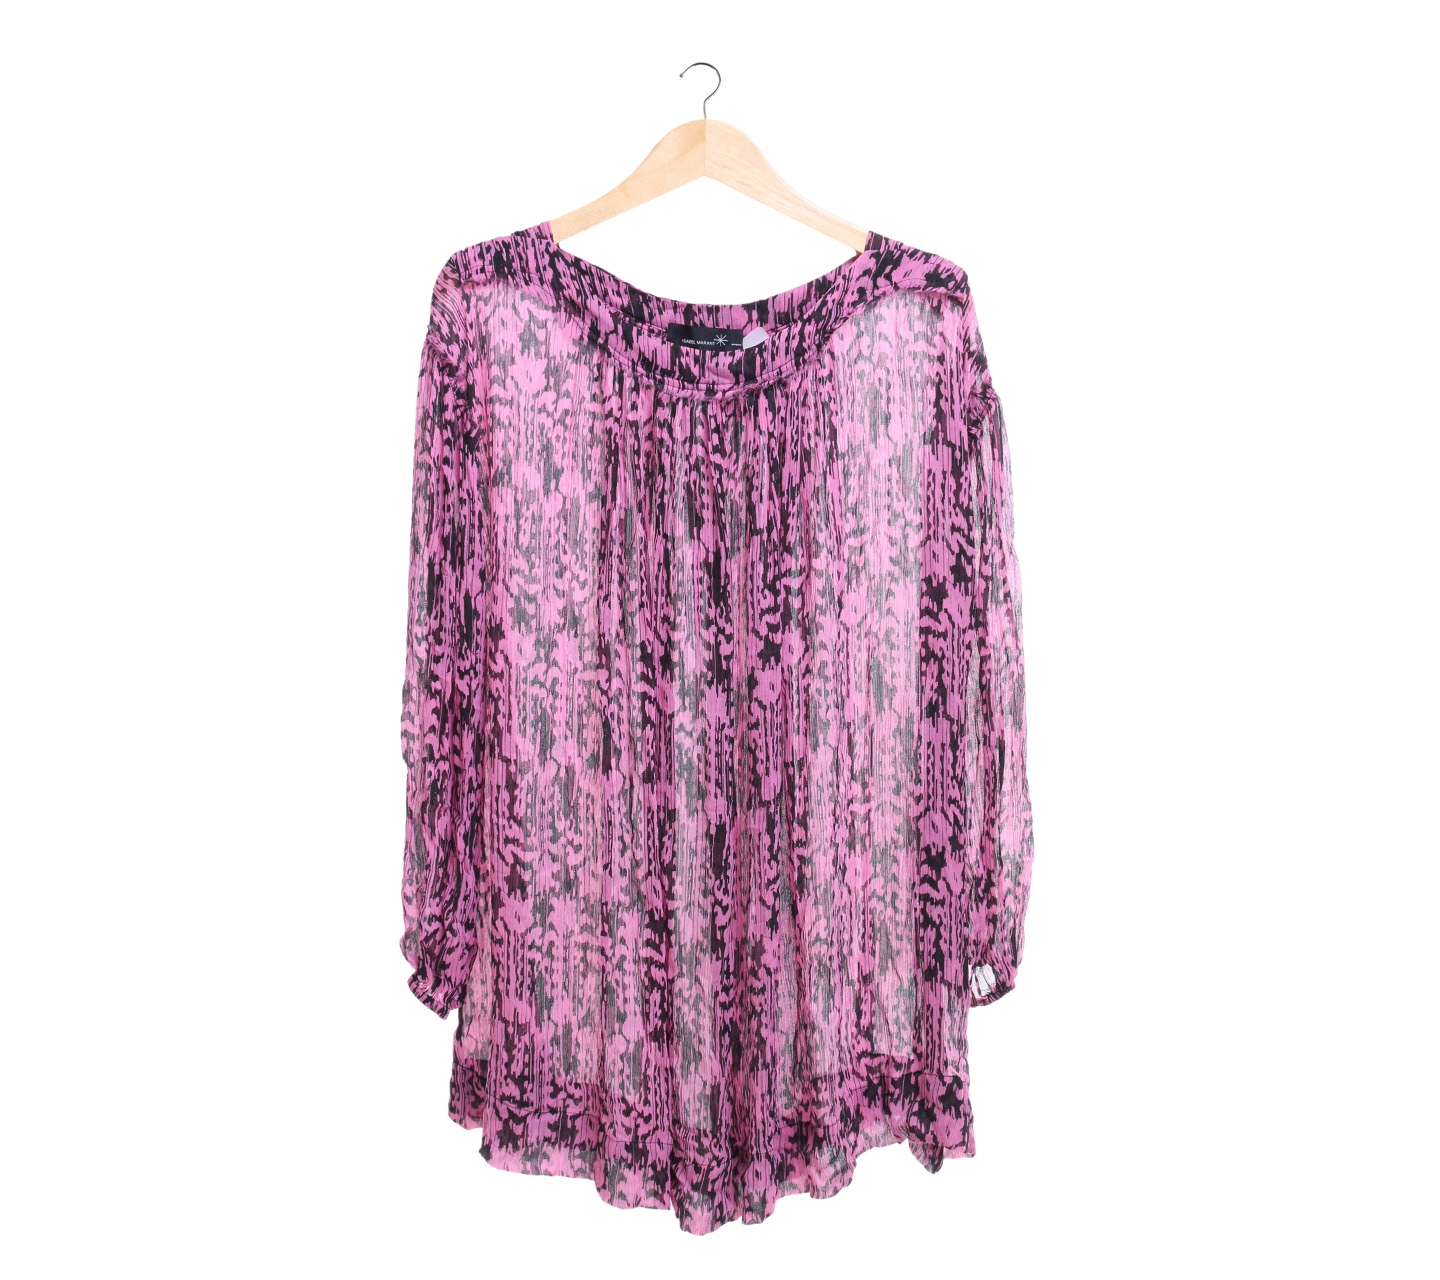 Isabel Marant Pink And Black Tunic Blouse